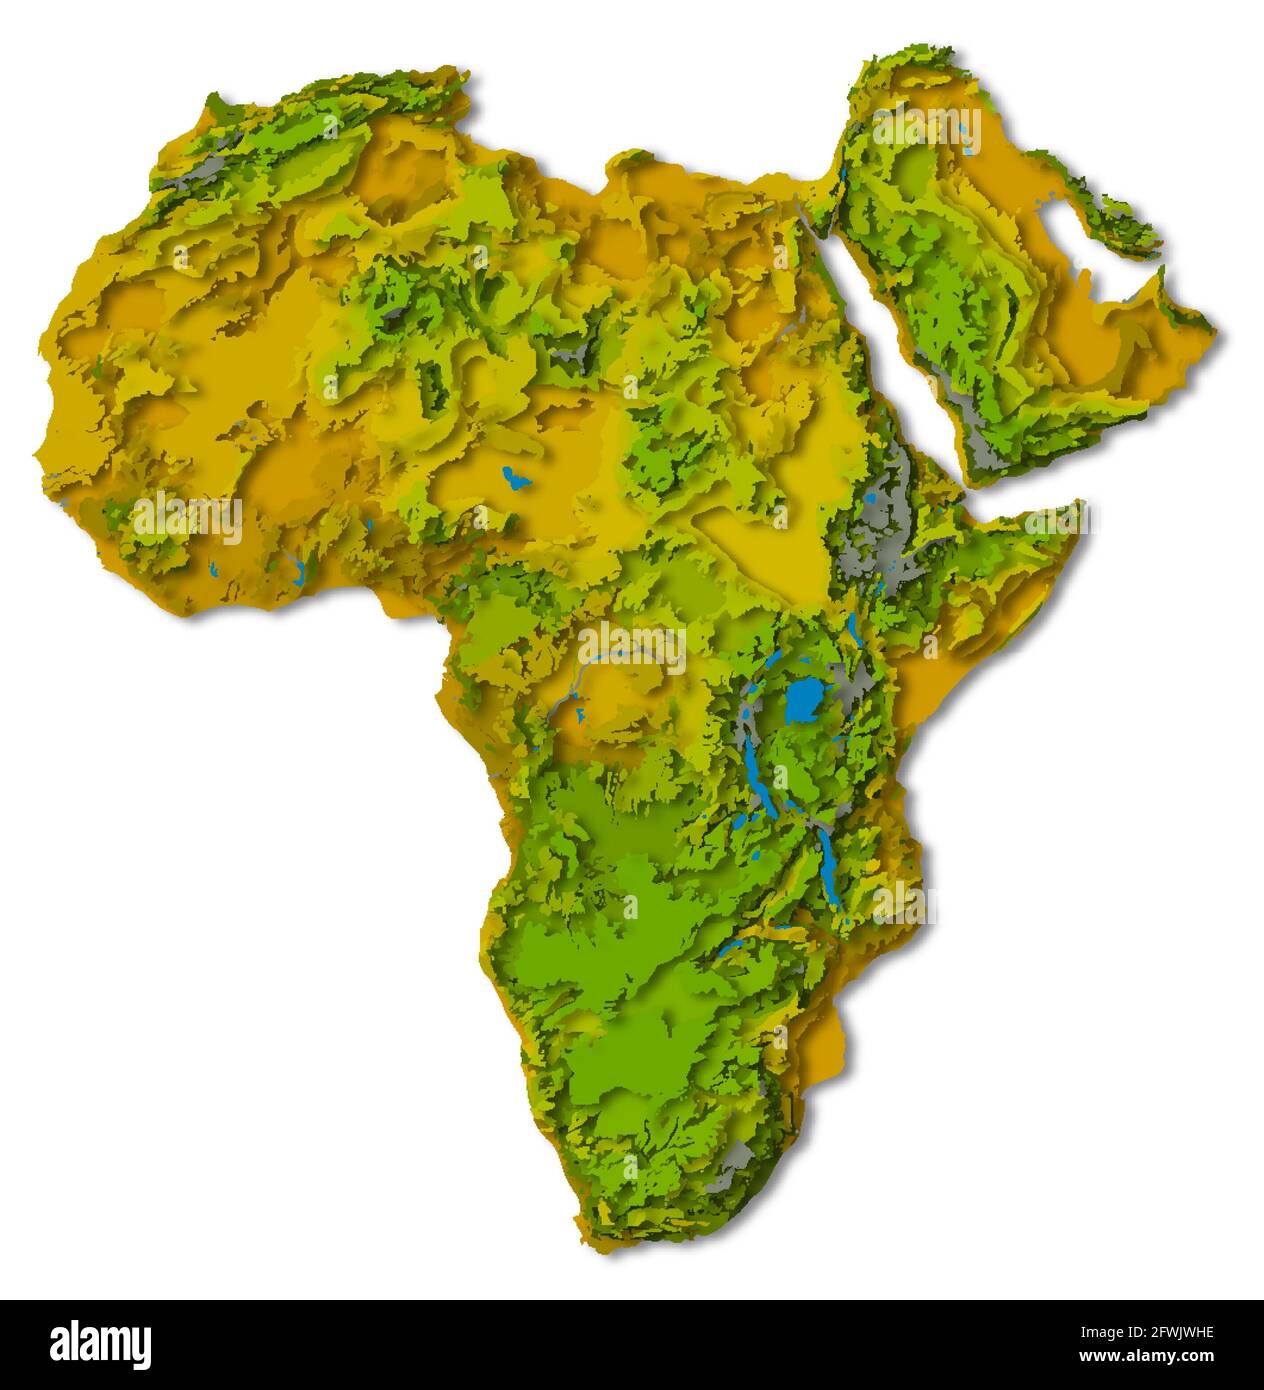 Africa continent, detailed papercut layered map with shadows, isolated on white background. Elements of this image furnished by NASA. Stock Photo